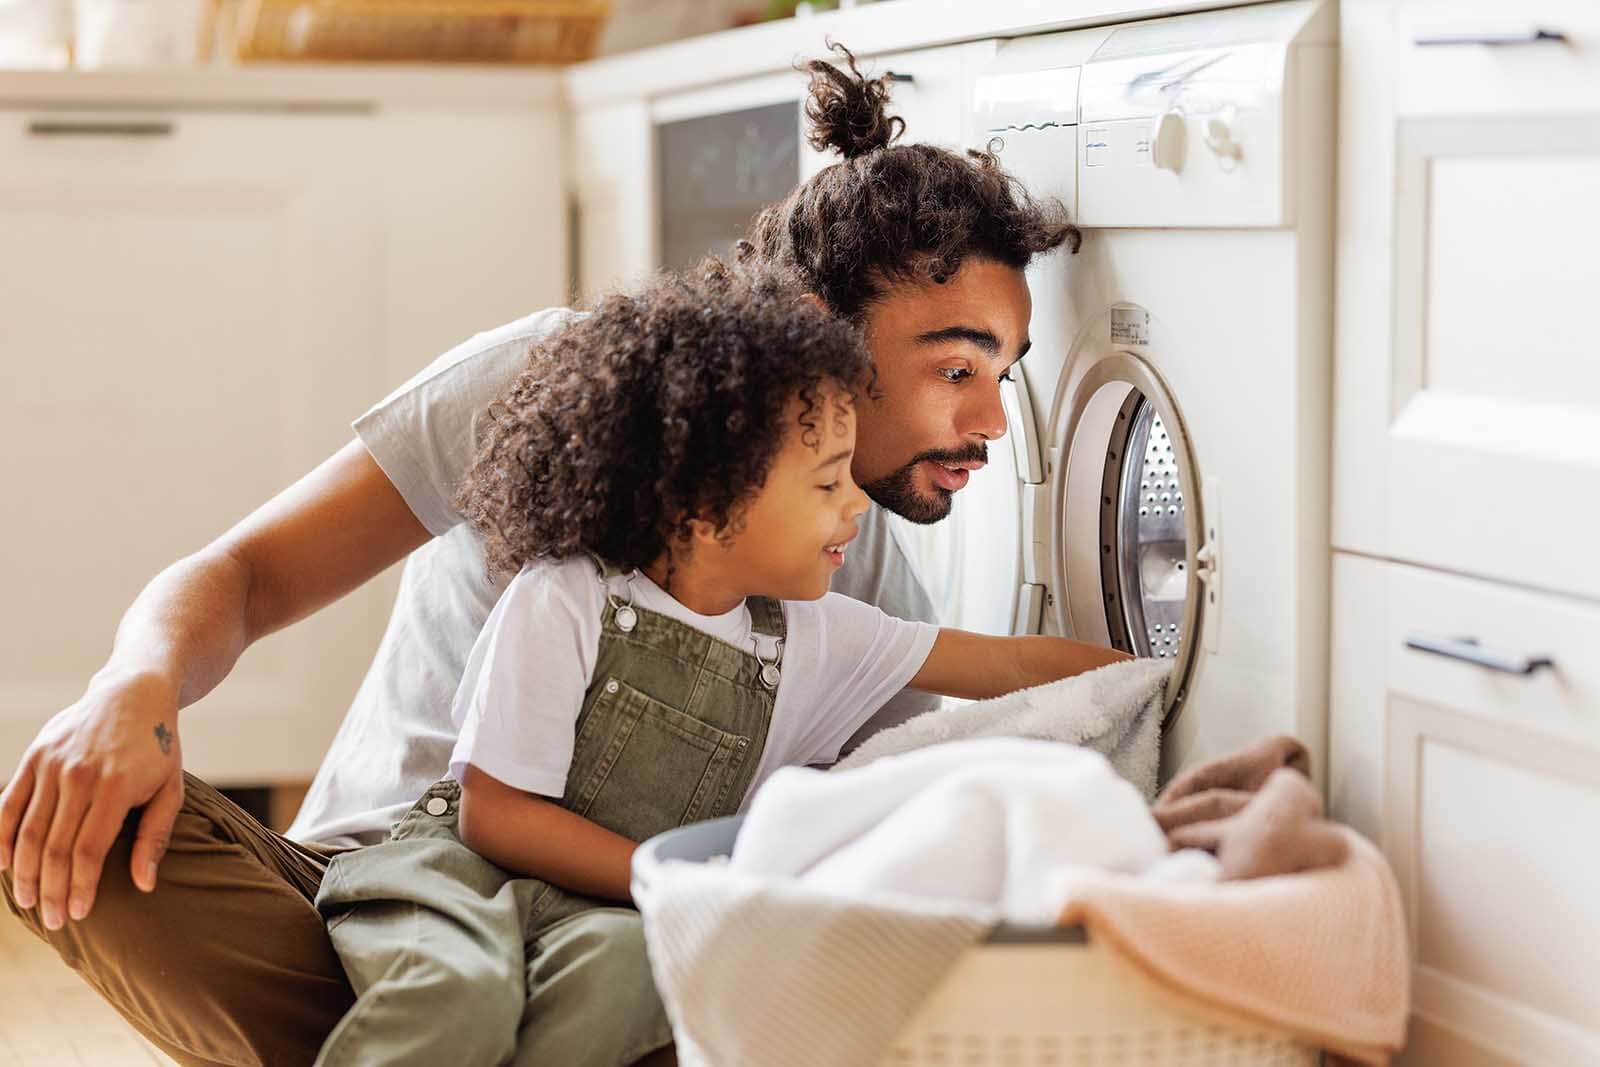 A dad doing laundry with his kid